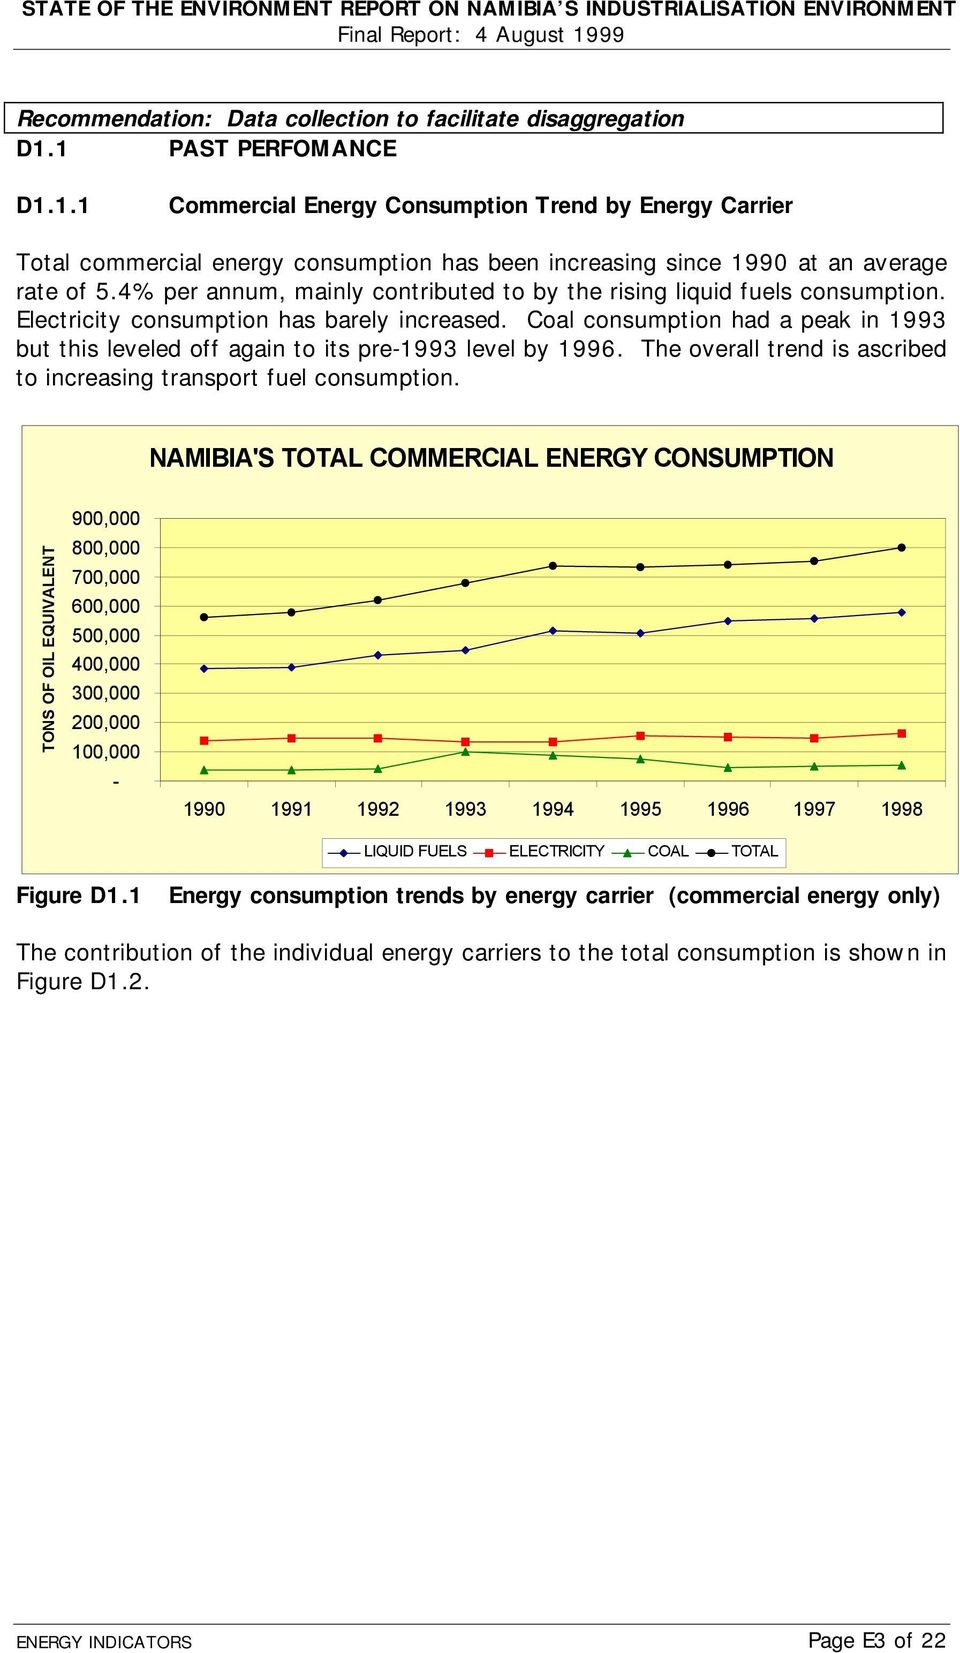 4% per annum, mainly contributed to by the rising liquid fuels consumption. Electricity consumption has barely increased.